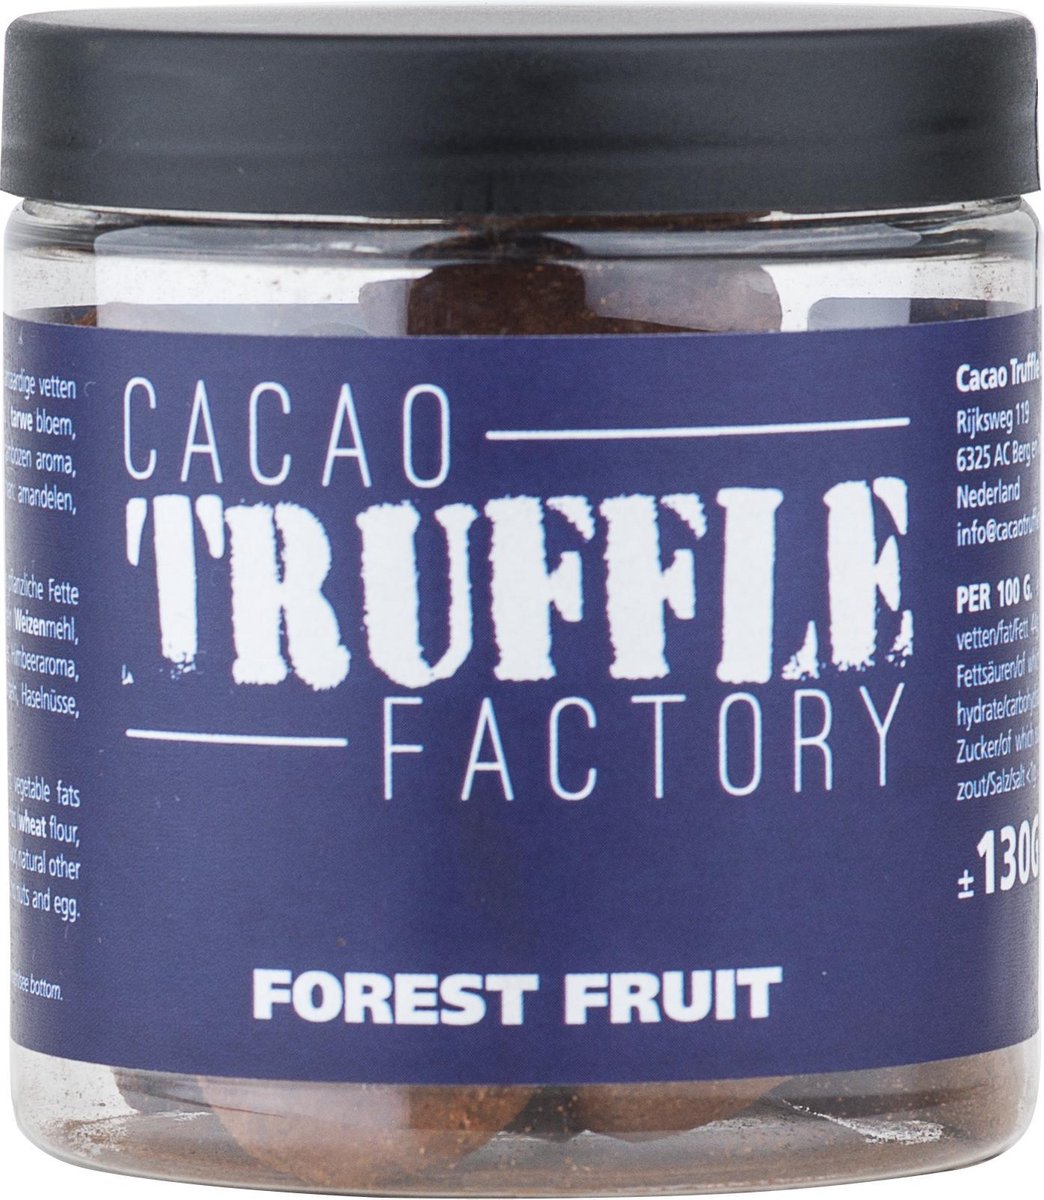 Chocolate Company Cacao Truffle Factory Forest Fruit 2 x 130g Chocolade Truffels (Duopack) - Chocolate Company